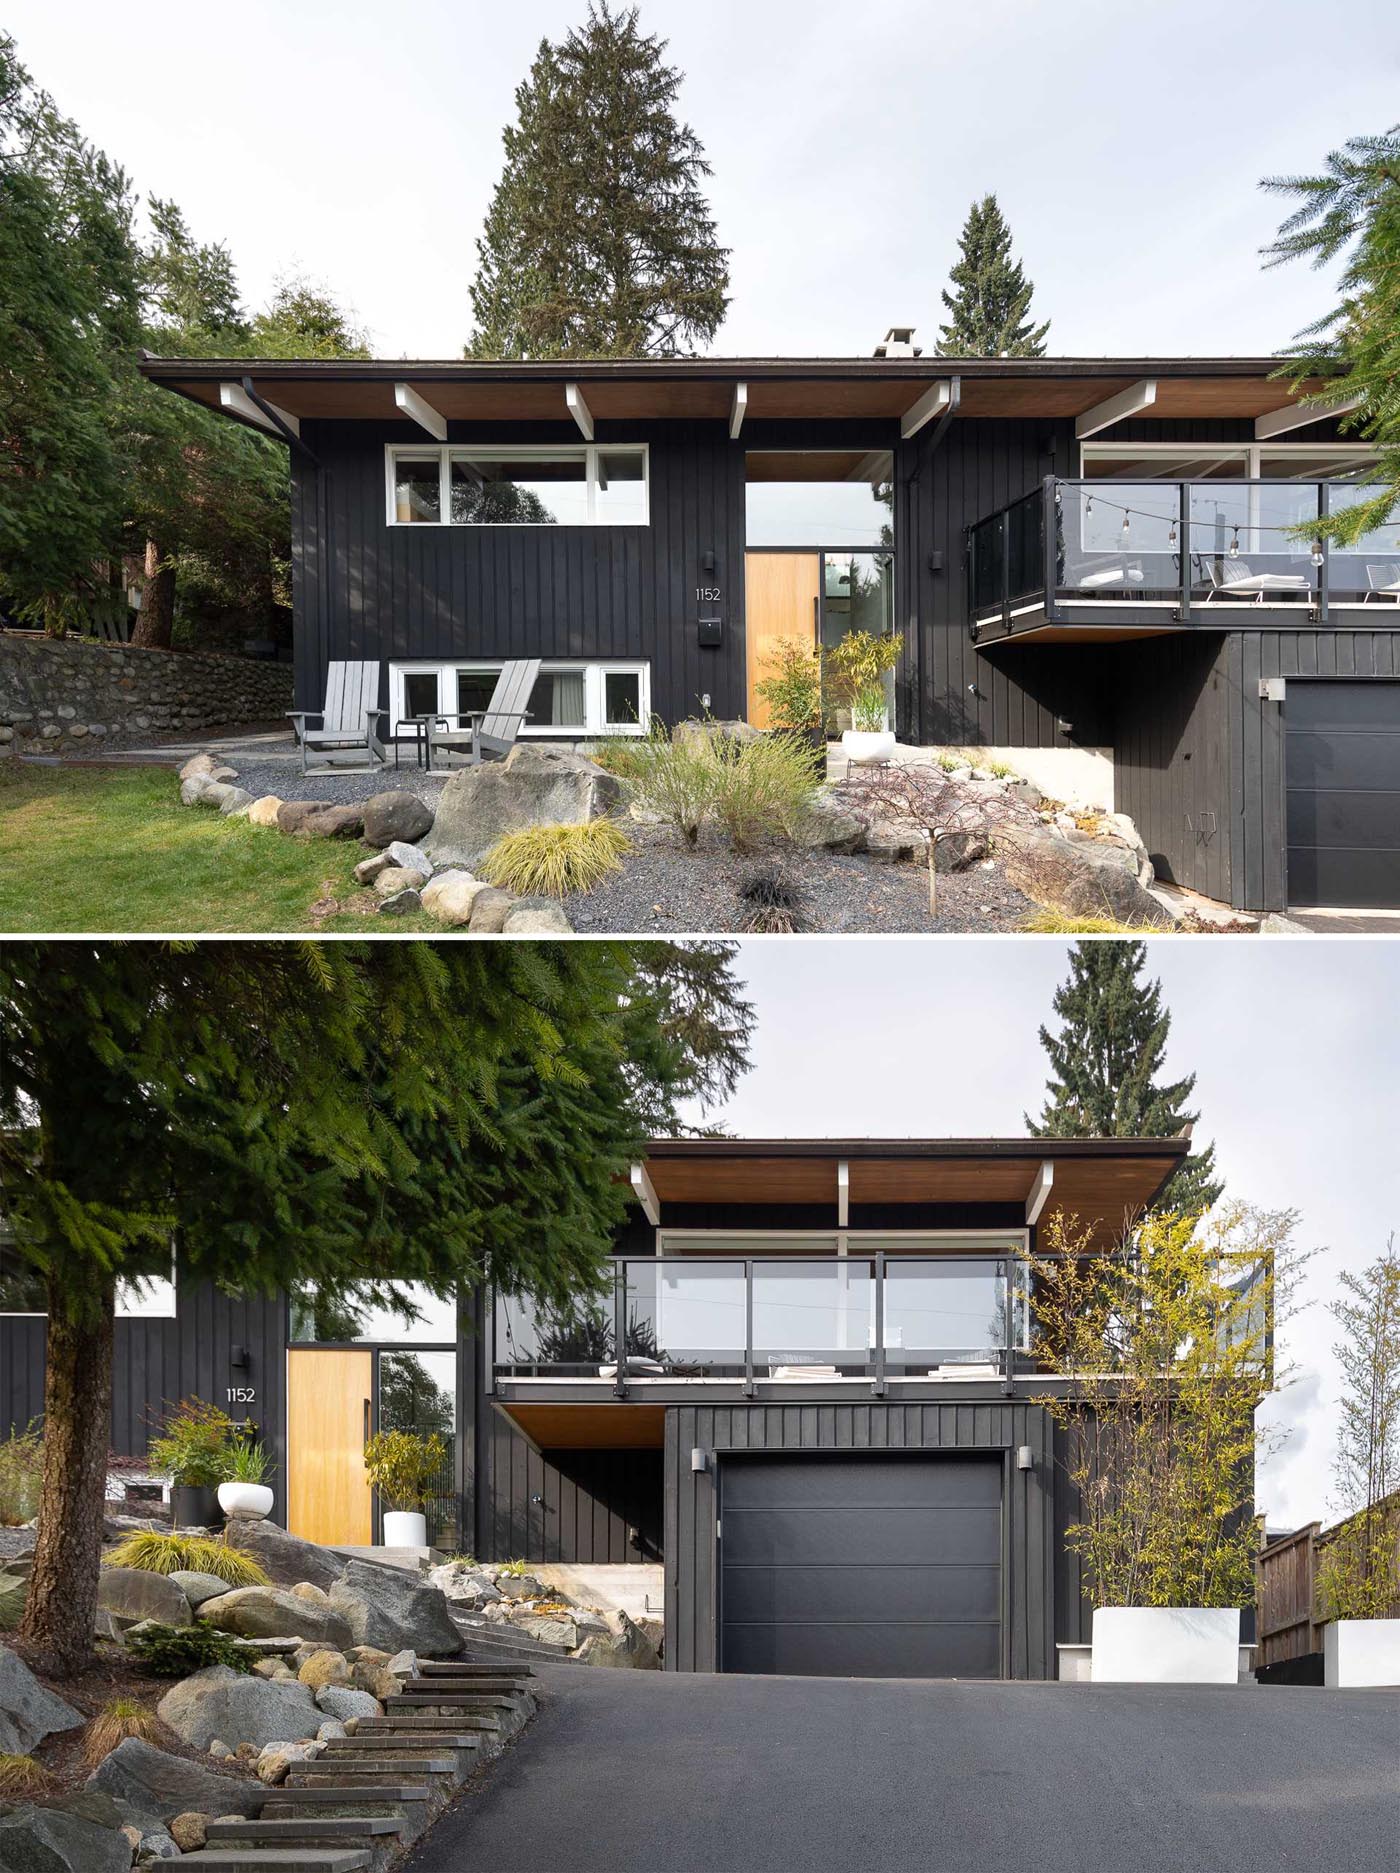 The remodeled facade of this mid-century modern home included a fresh coast of black paint, glass railings on the deck, a new wood front door, white accents, and a Granite rock garden with seating area.